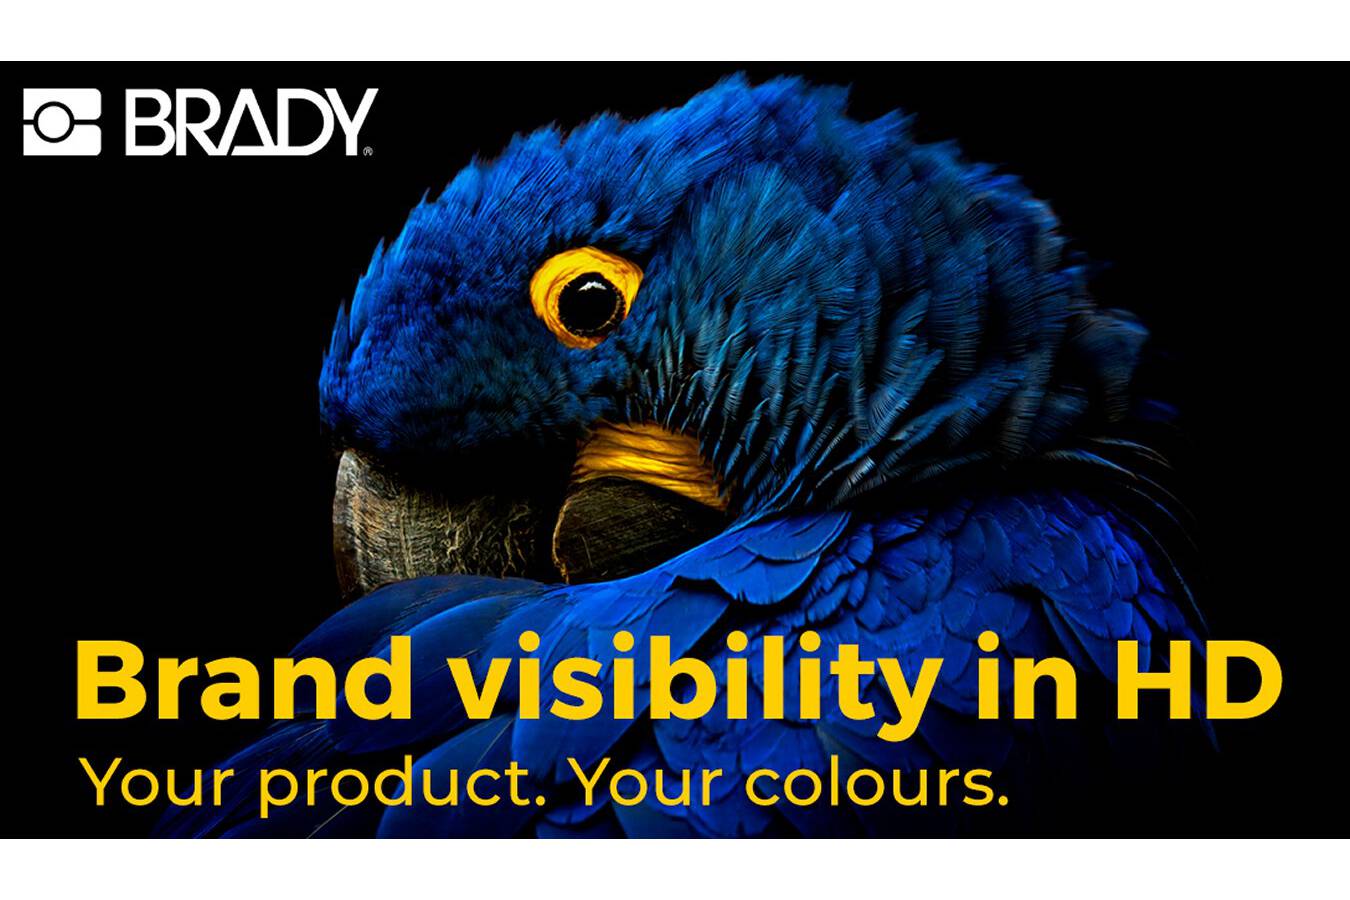 Brand visibility in HD: Your product. Your colours. Position your product exactly as envisioned - in sharp, high definition and lively colours that highlight your brand. Attract and inform your customers with a majestic label that values your brand, your product and your customer.